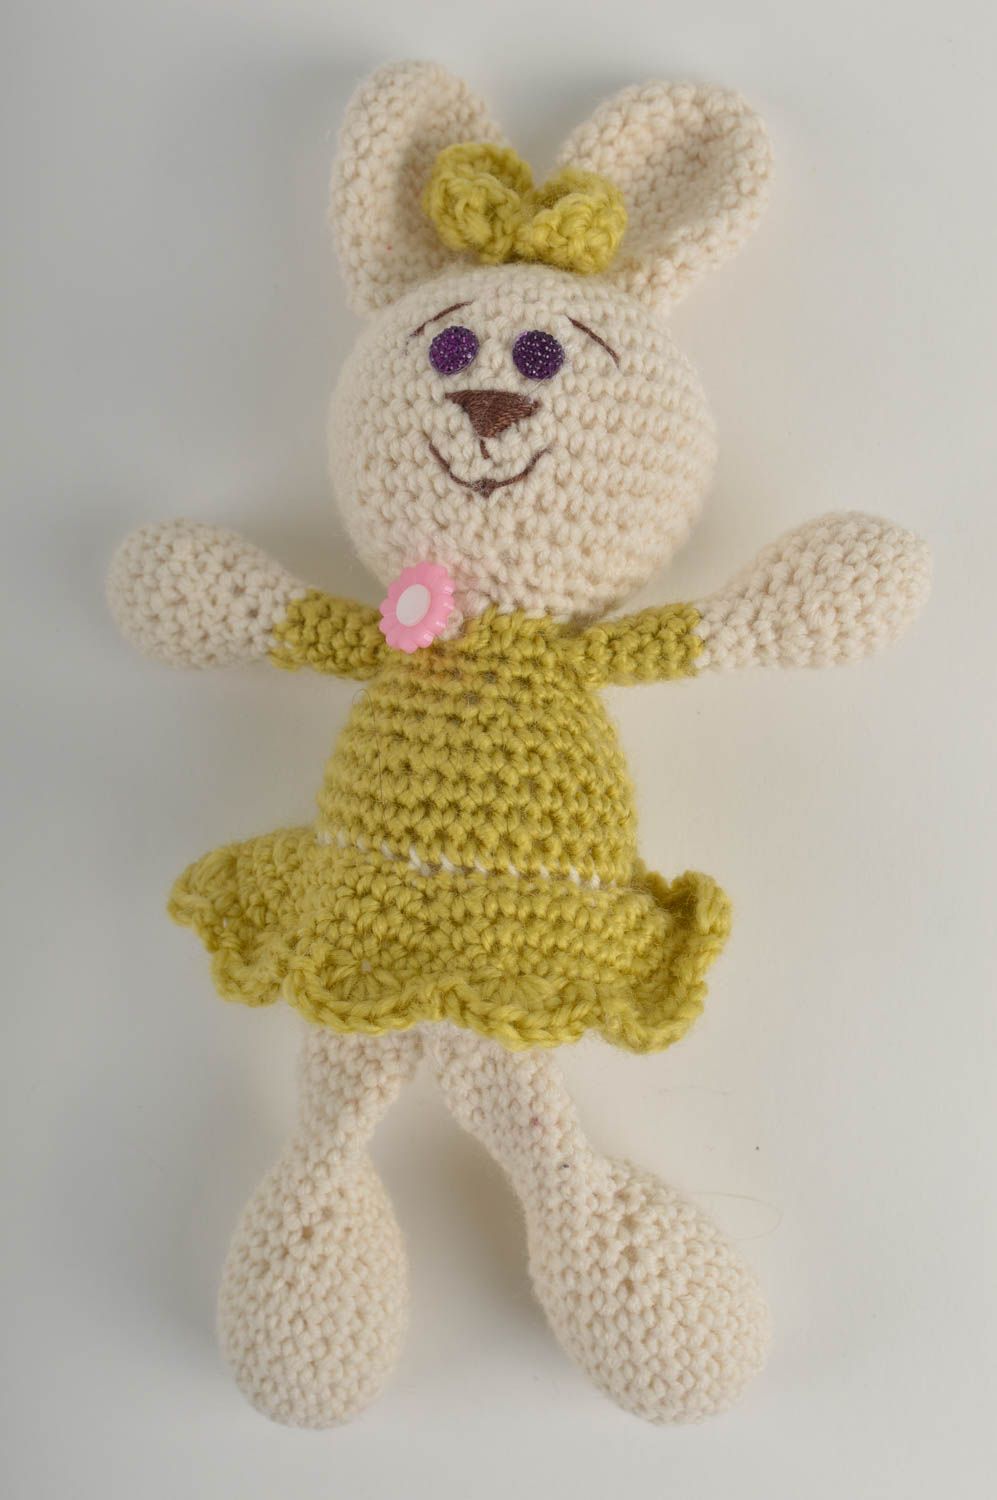 Beautiful handmade crochet toy soft toy cute toys for kids birthday gift ideas photo 3